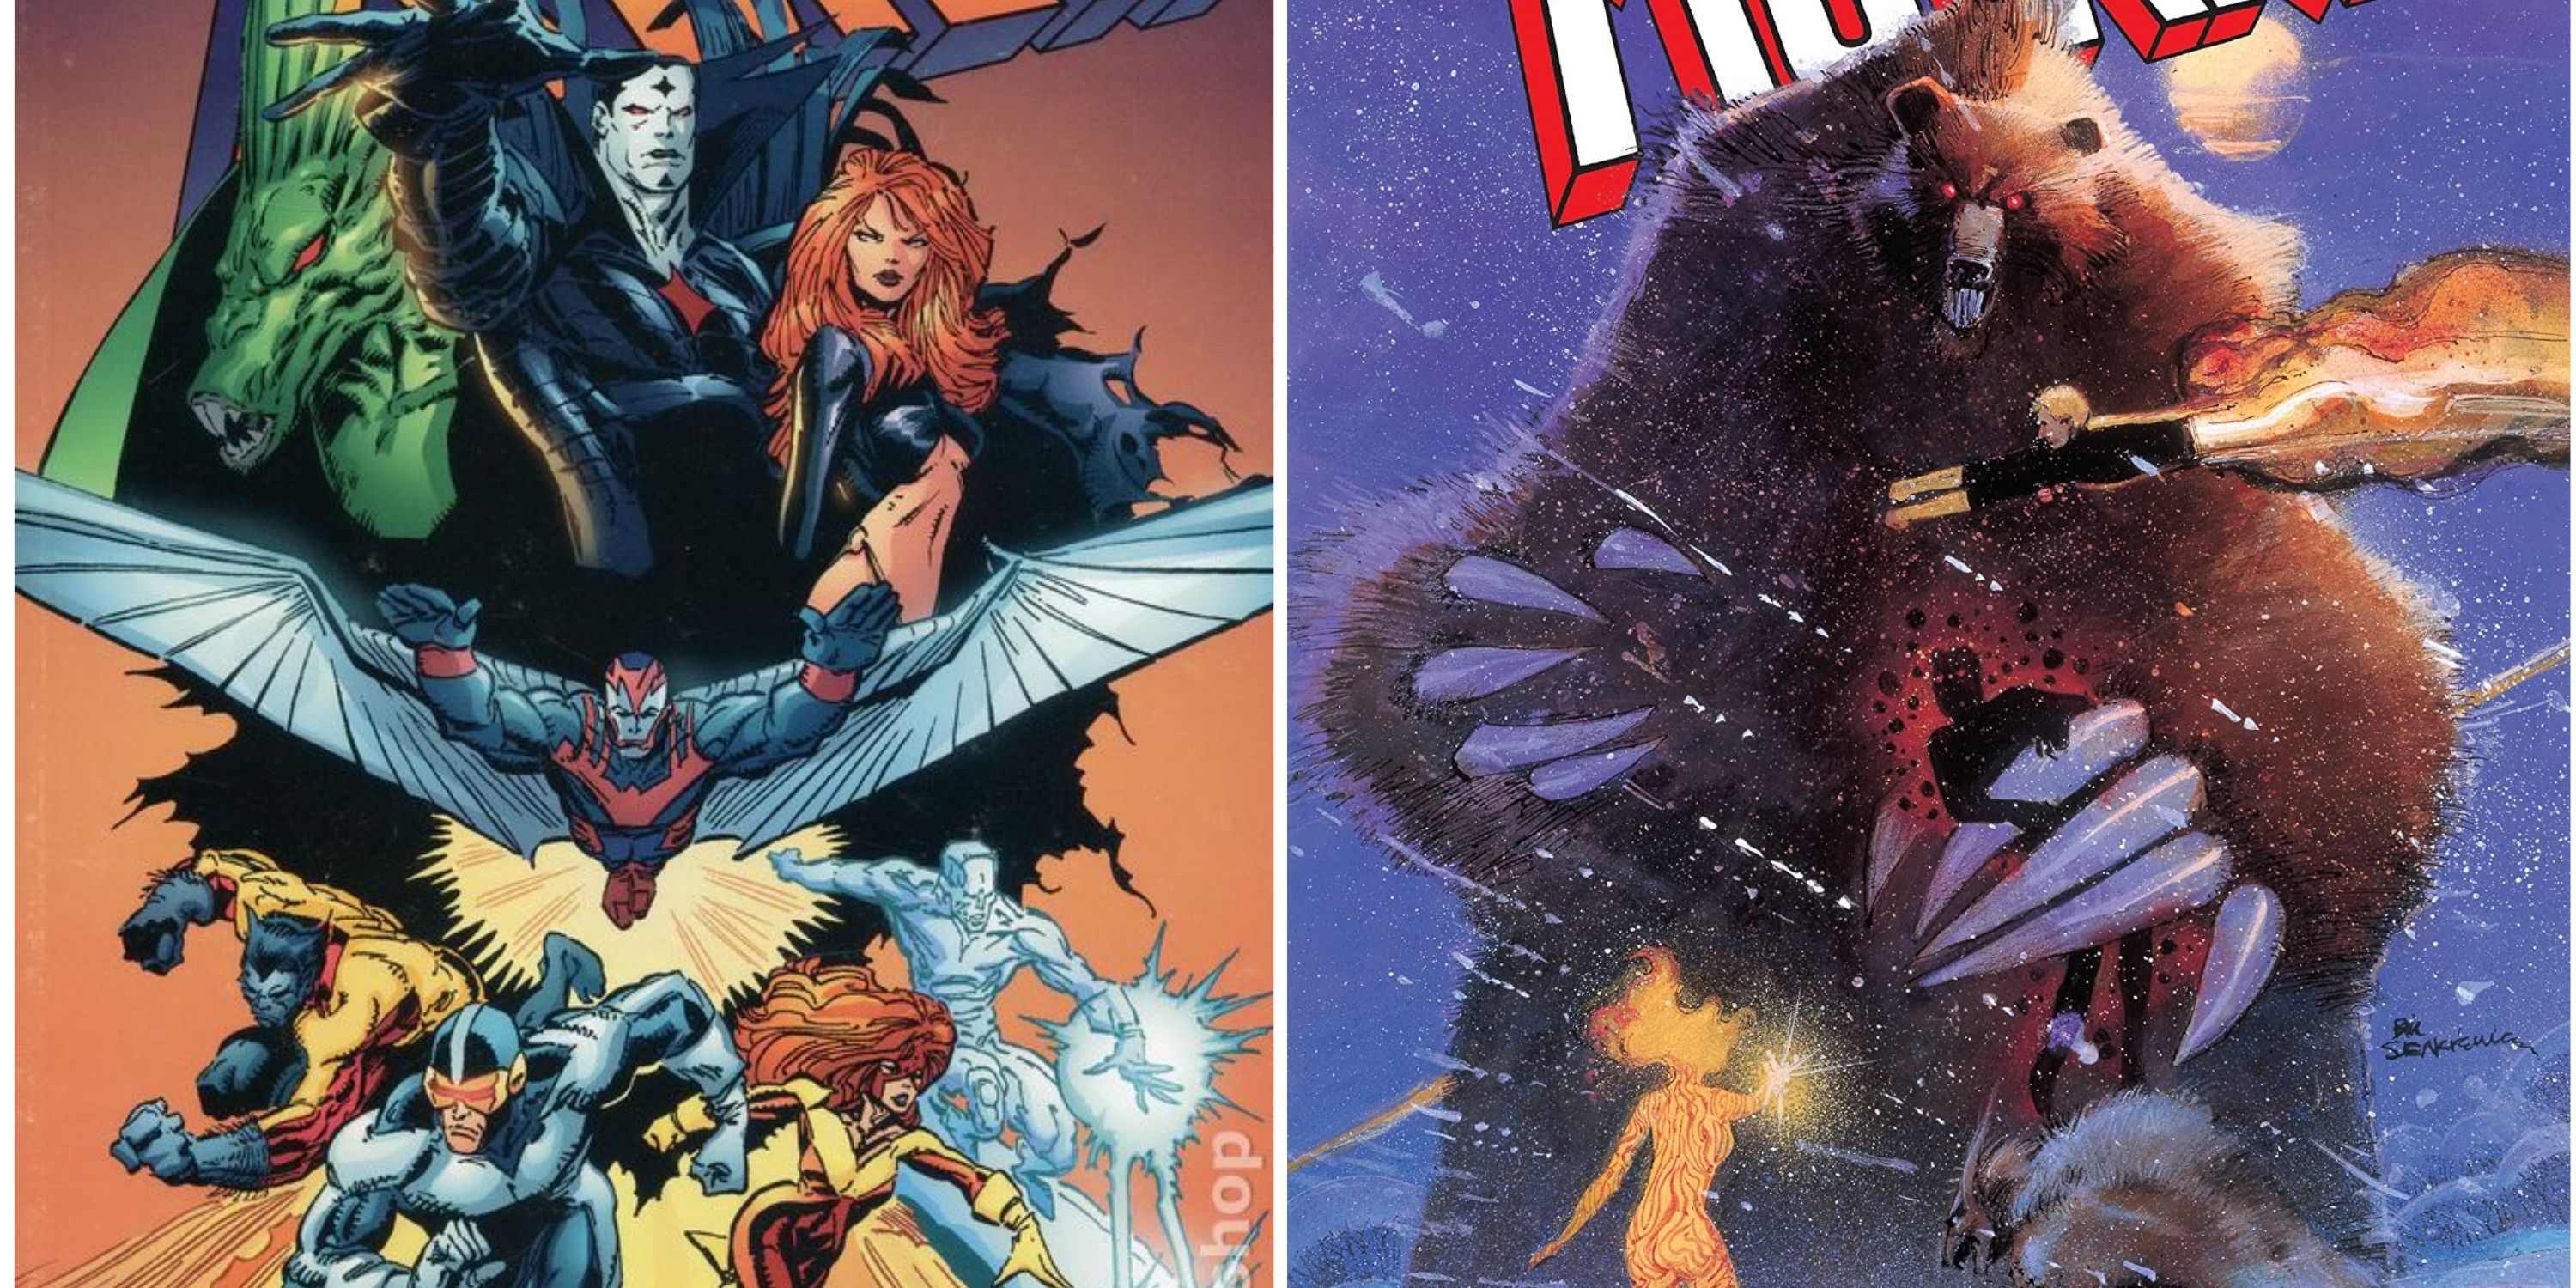 Inferno cover featuring N'astirh, Mister Sinister, and Madelyne Pryor over the original X-Factor (left) and the Demon Bear by Bill Sienkiewicz fighting Sunspot, Cannonball, and Magma (right)